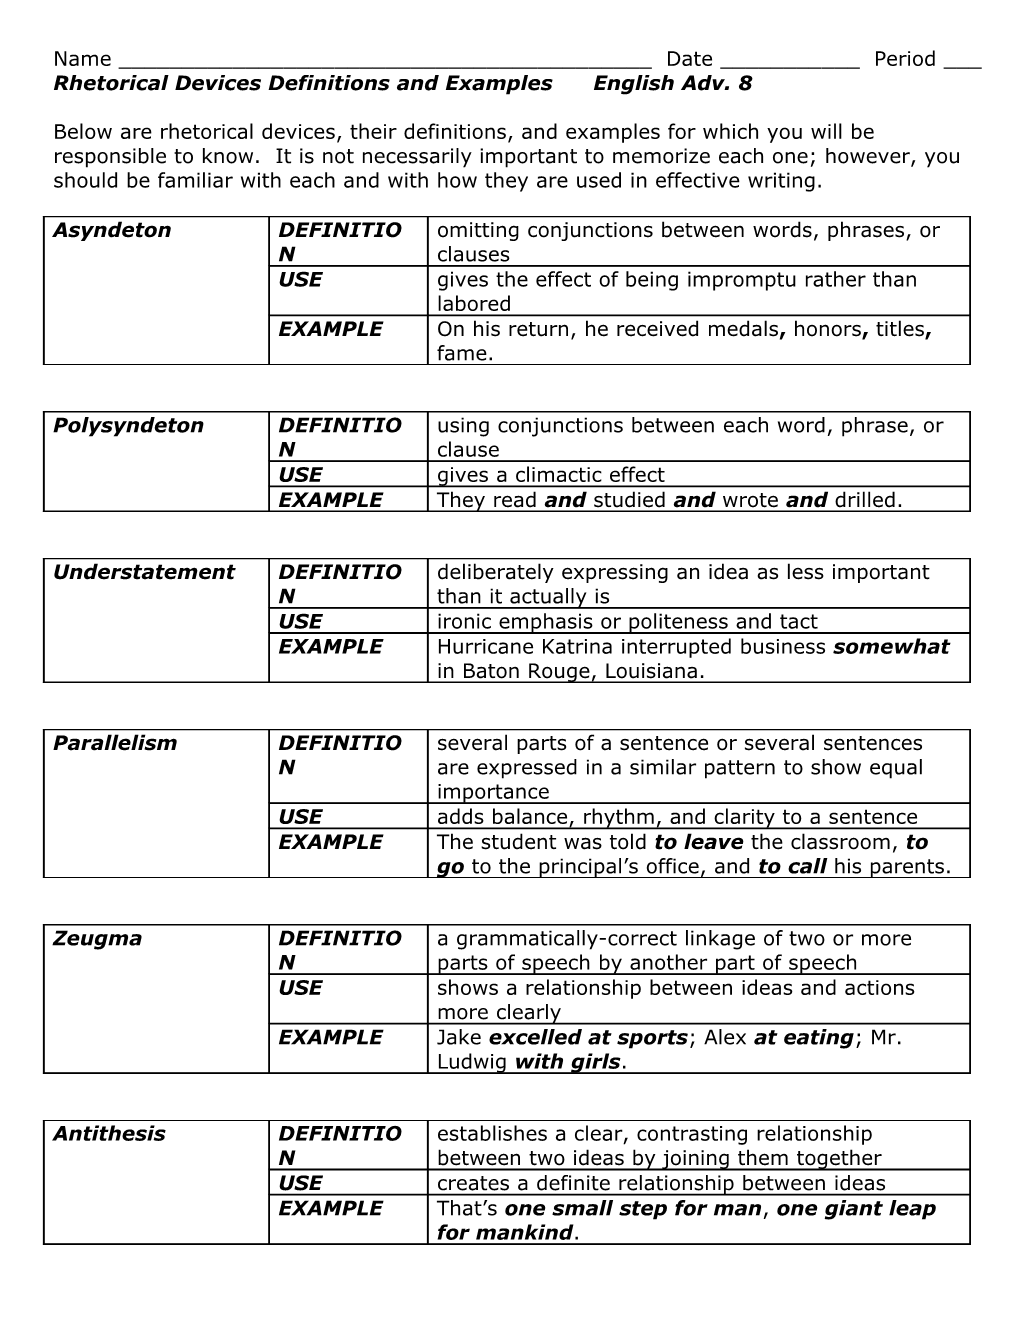 Rhetorical Devices Definitions and Examplesenglish Adv. 8